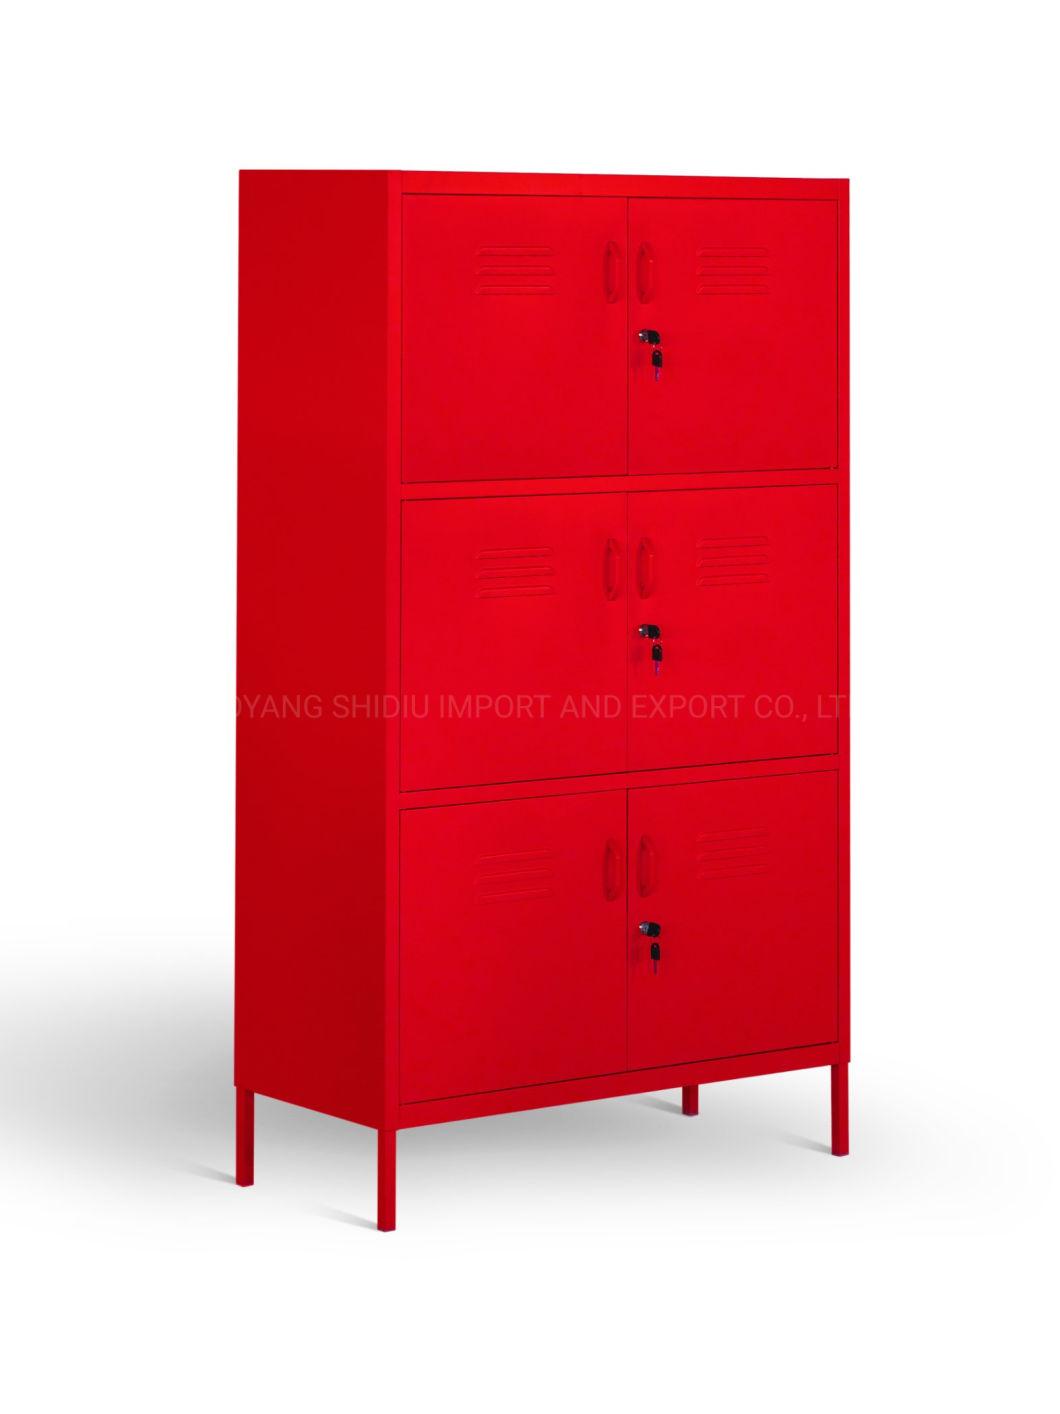 Home Use Metal Storage Cache Cabinet for Kitchen/Pantry/Hallway